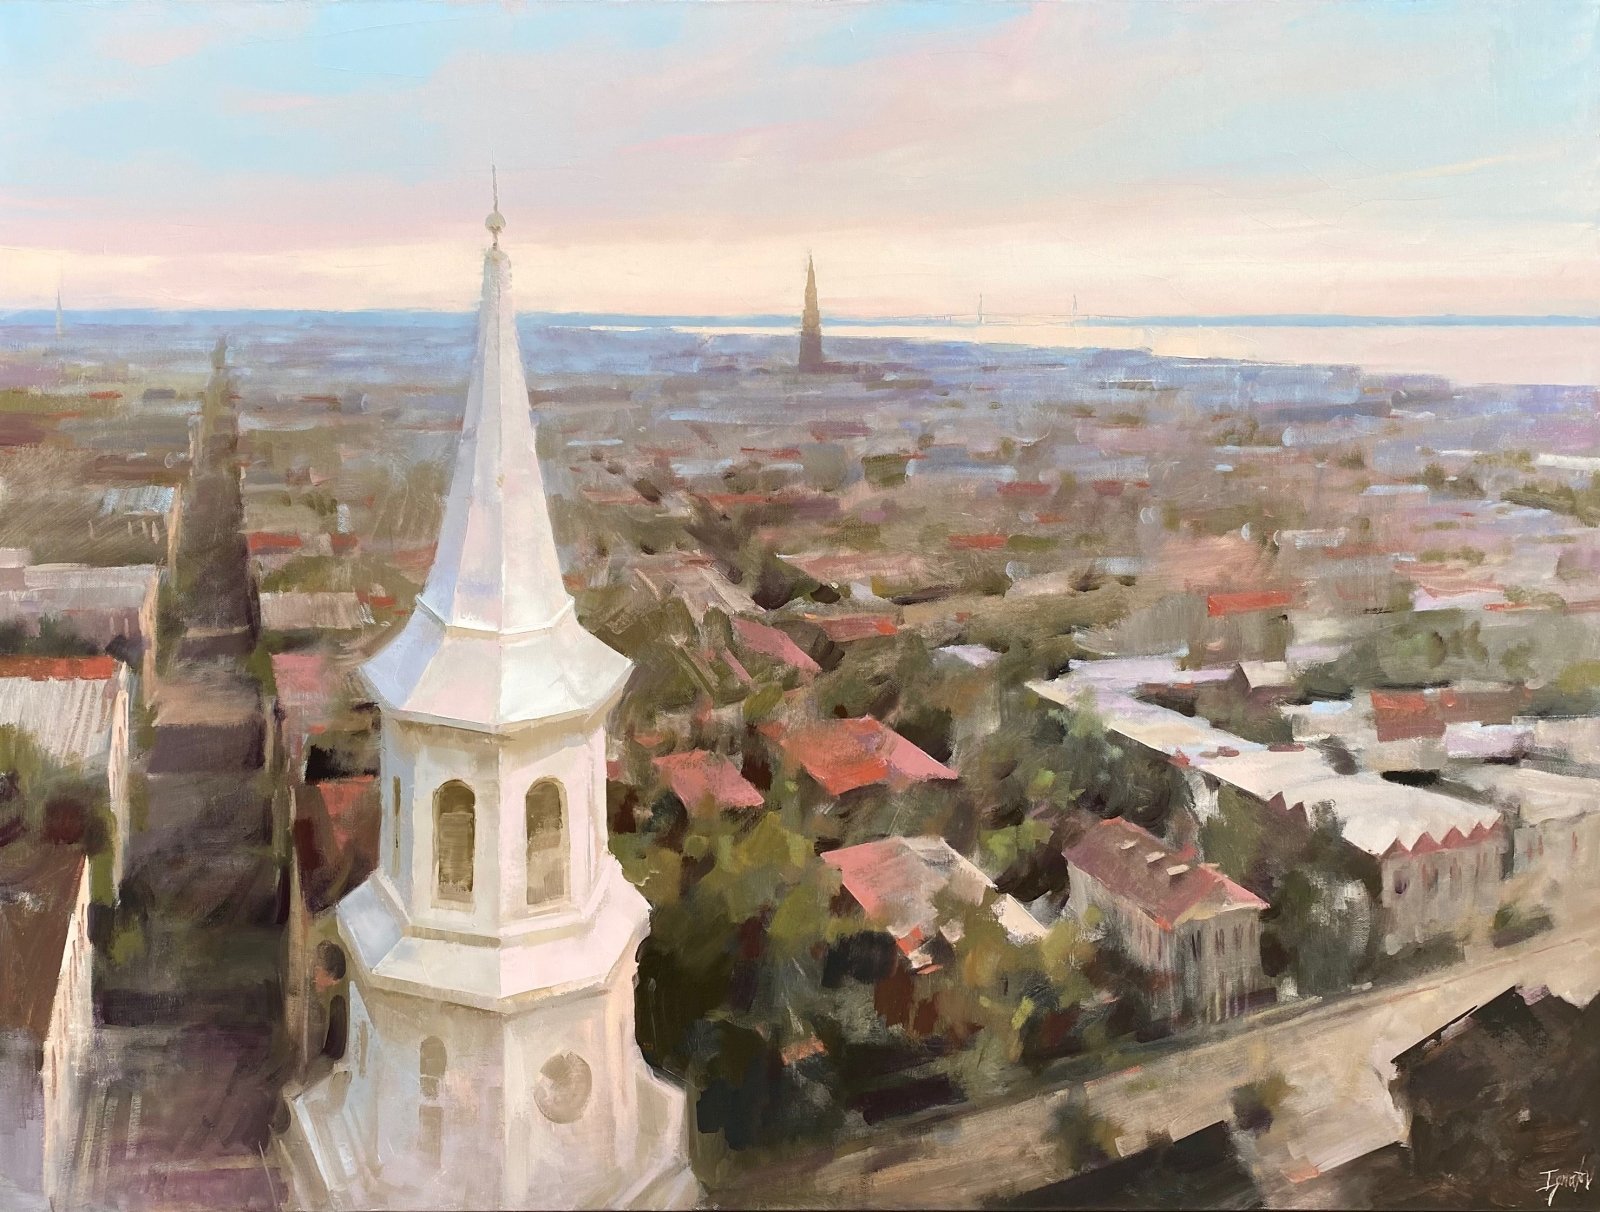 St. Michael's Rooftops by Ignat Ignatov at LePrince Galleries